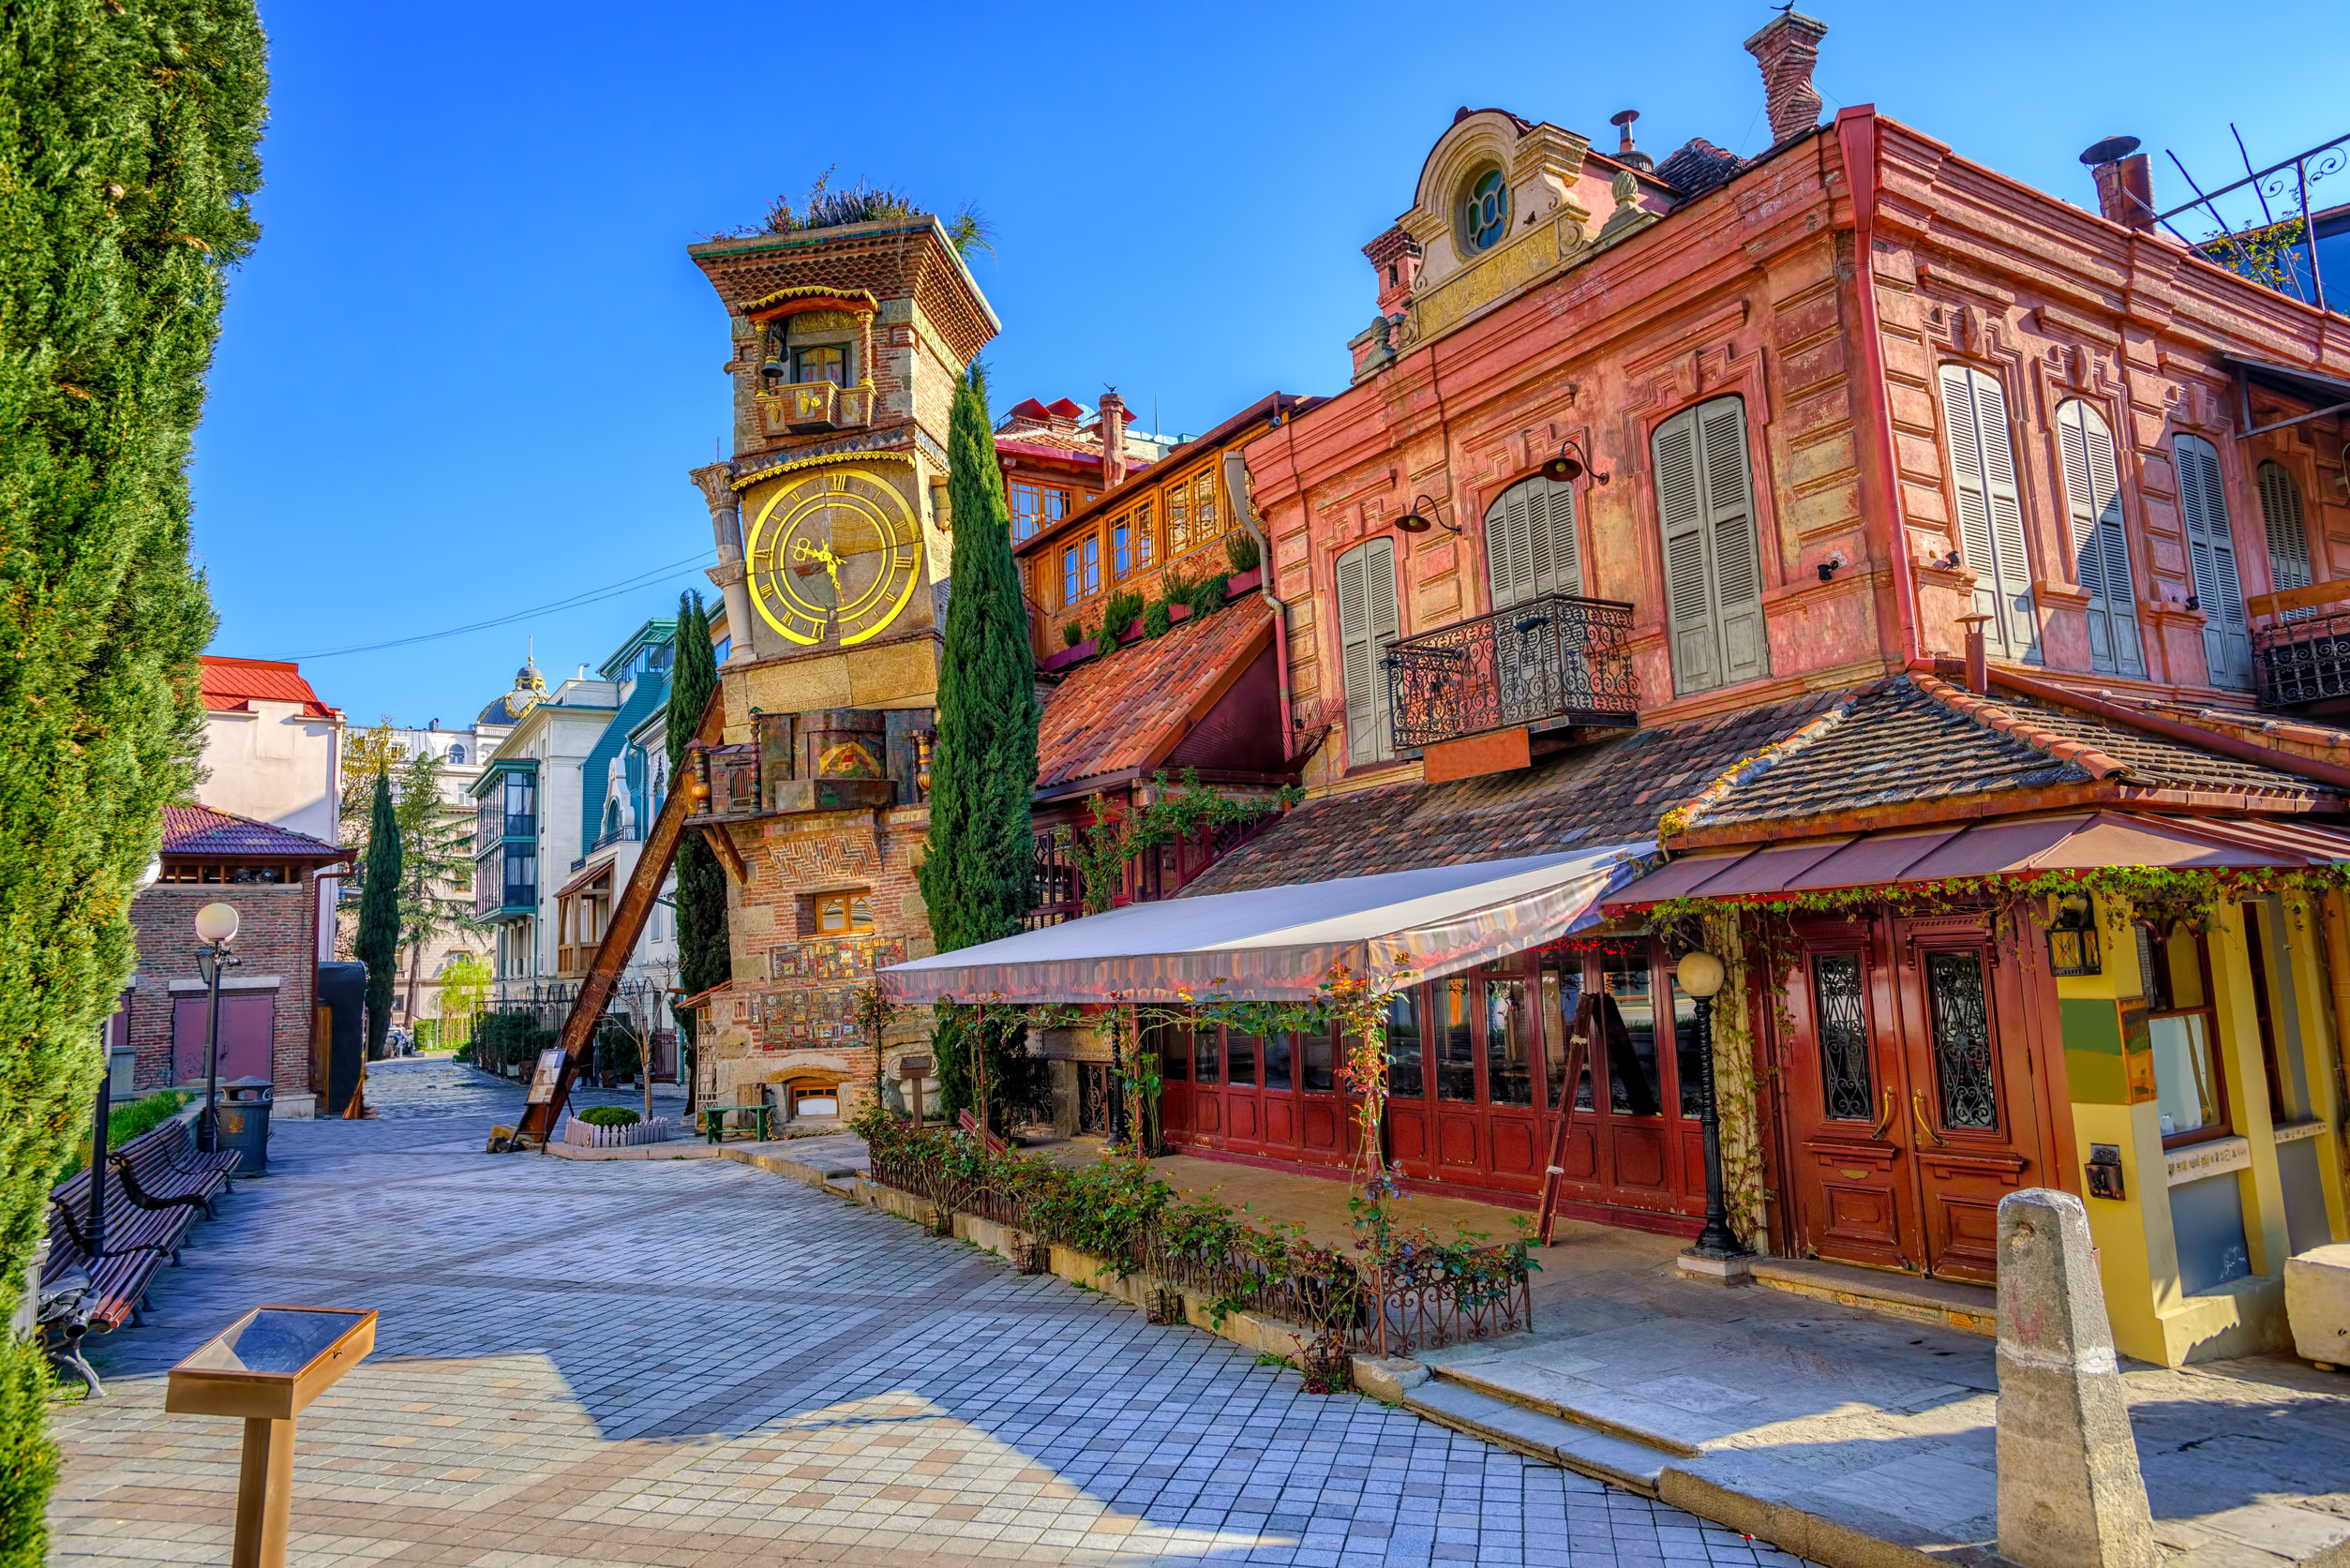 Explore Tbilisi with London TFE in-person training